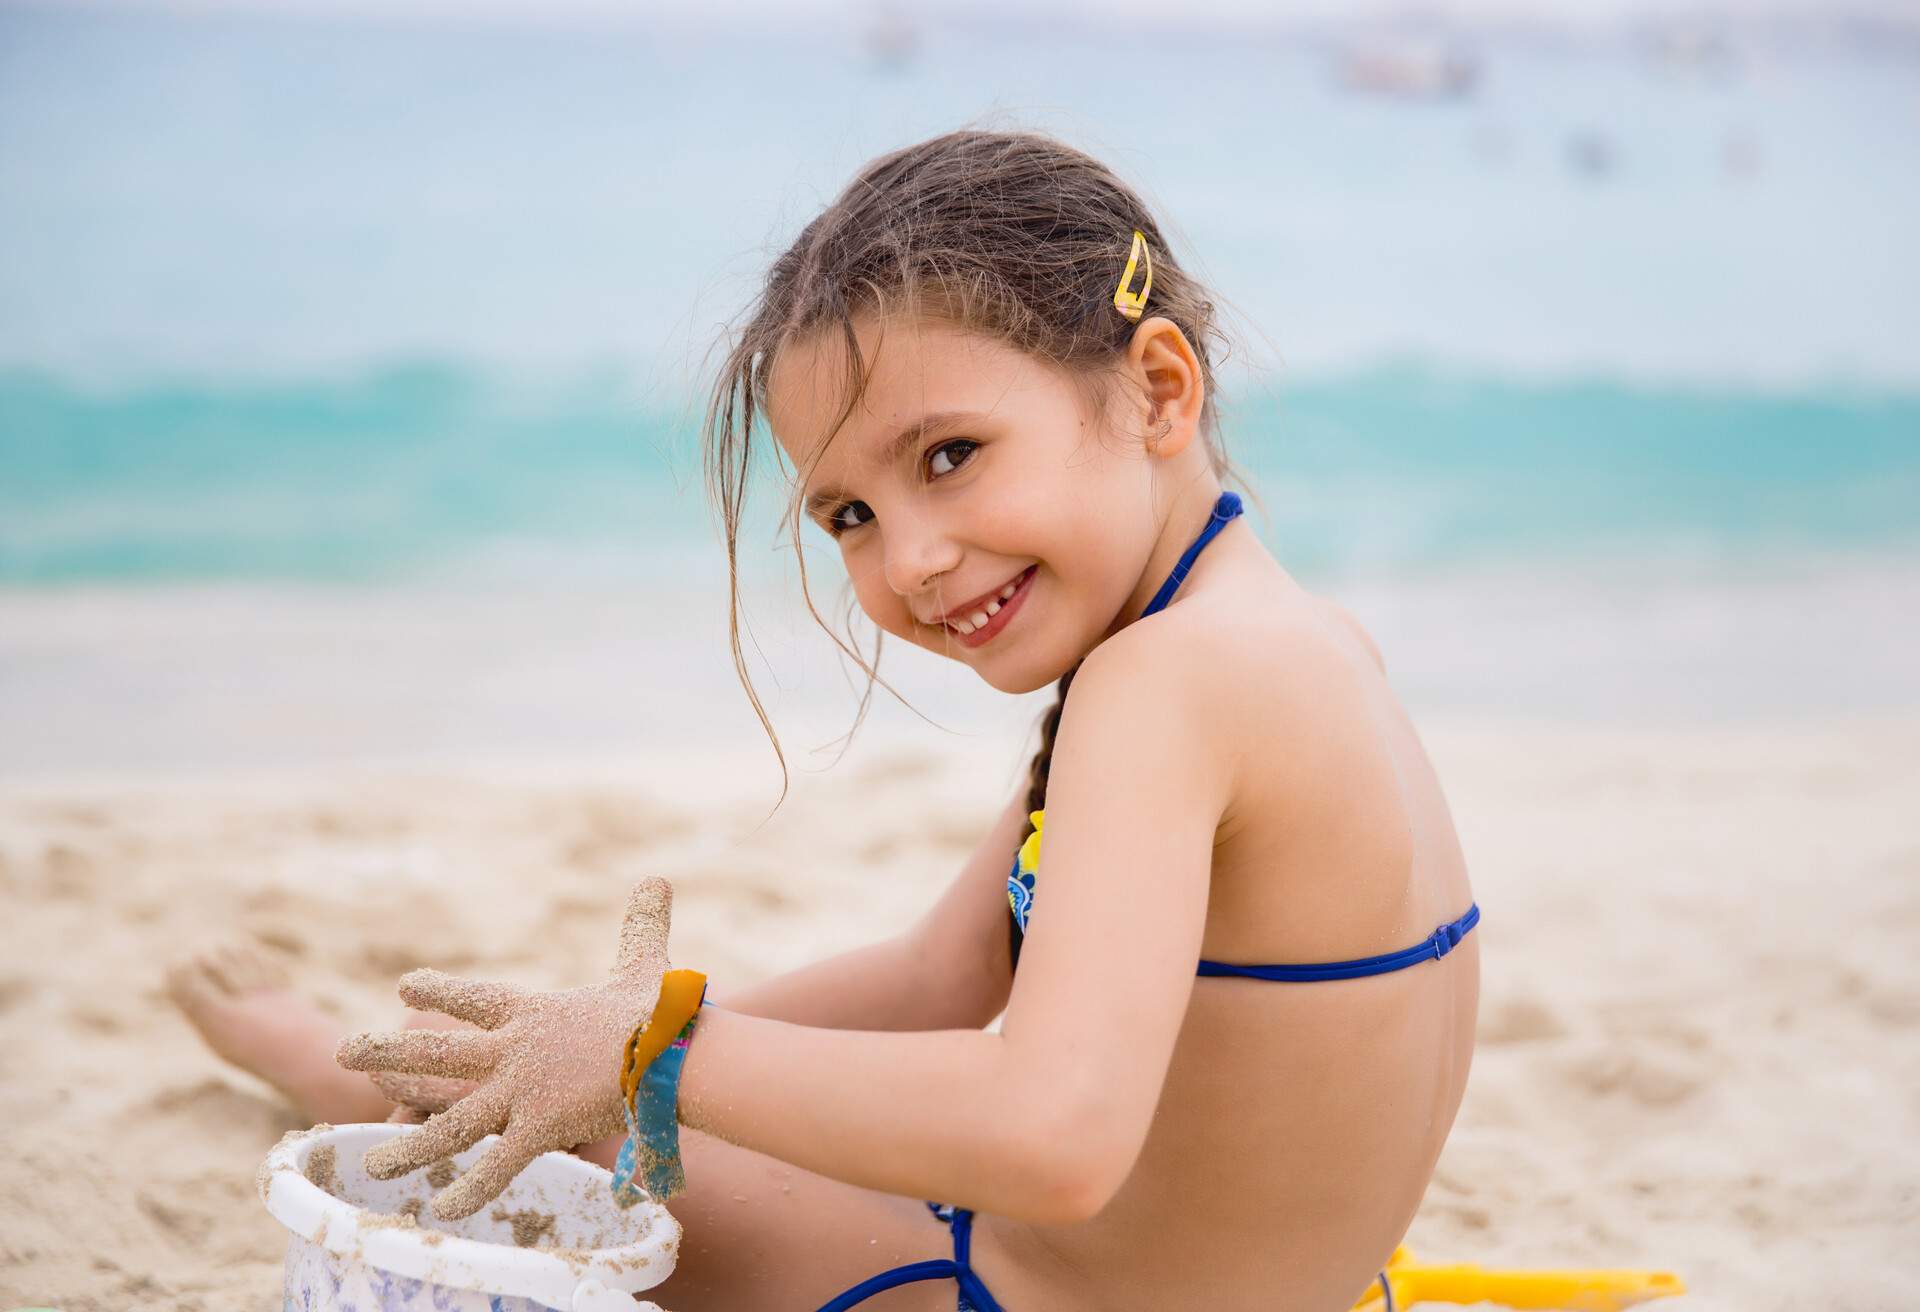 A little girl in her bikini is playing on the sand.